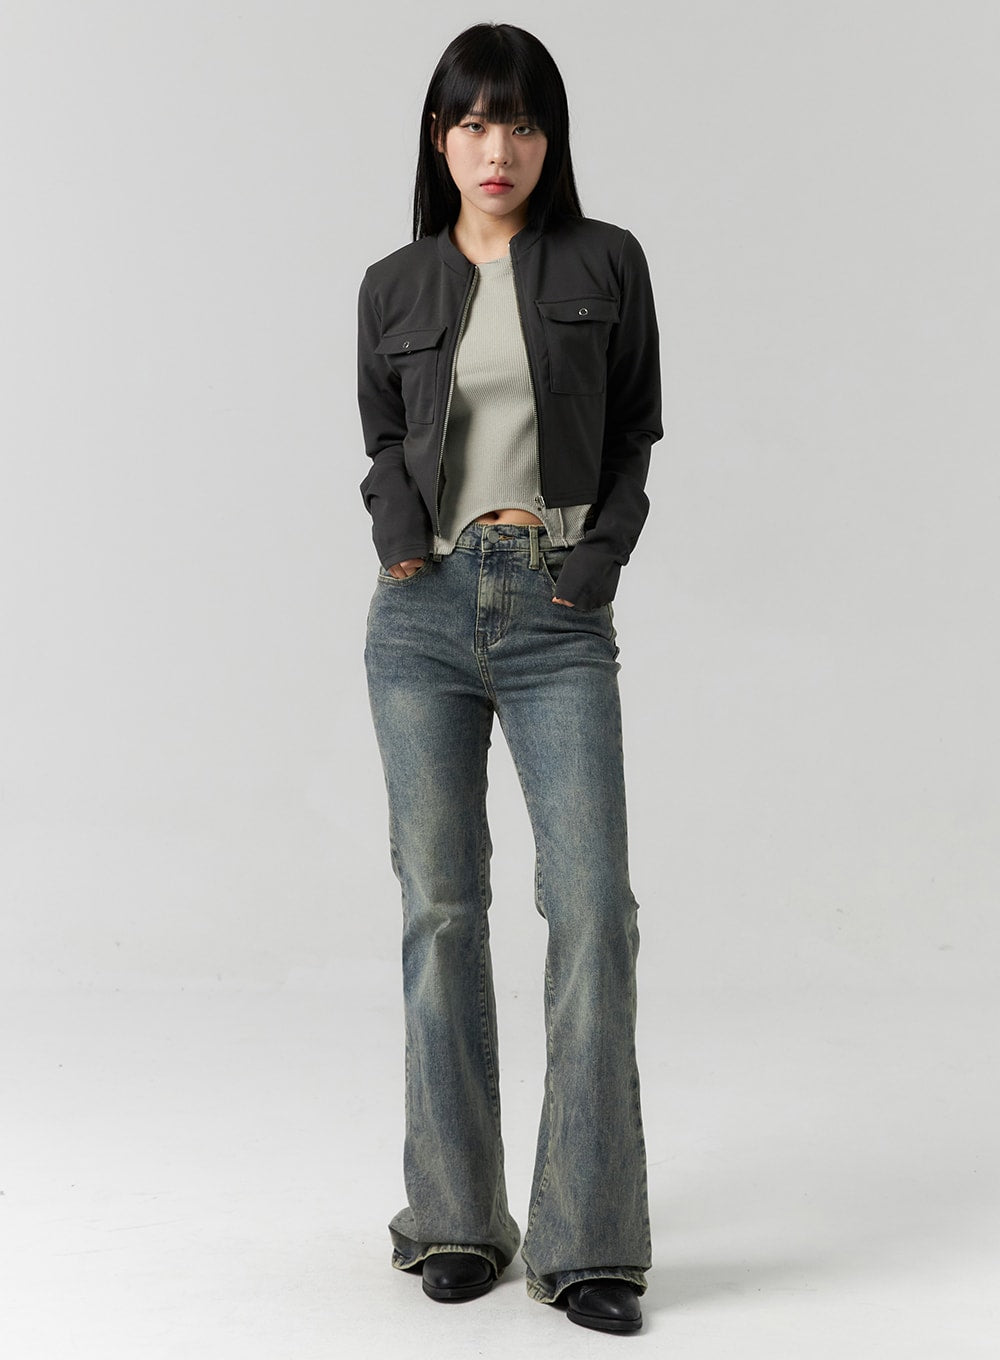 slim-fit-washed-bootcut-jeans-cs312